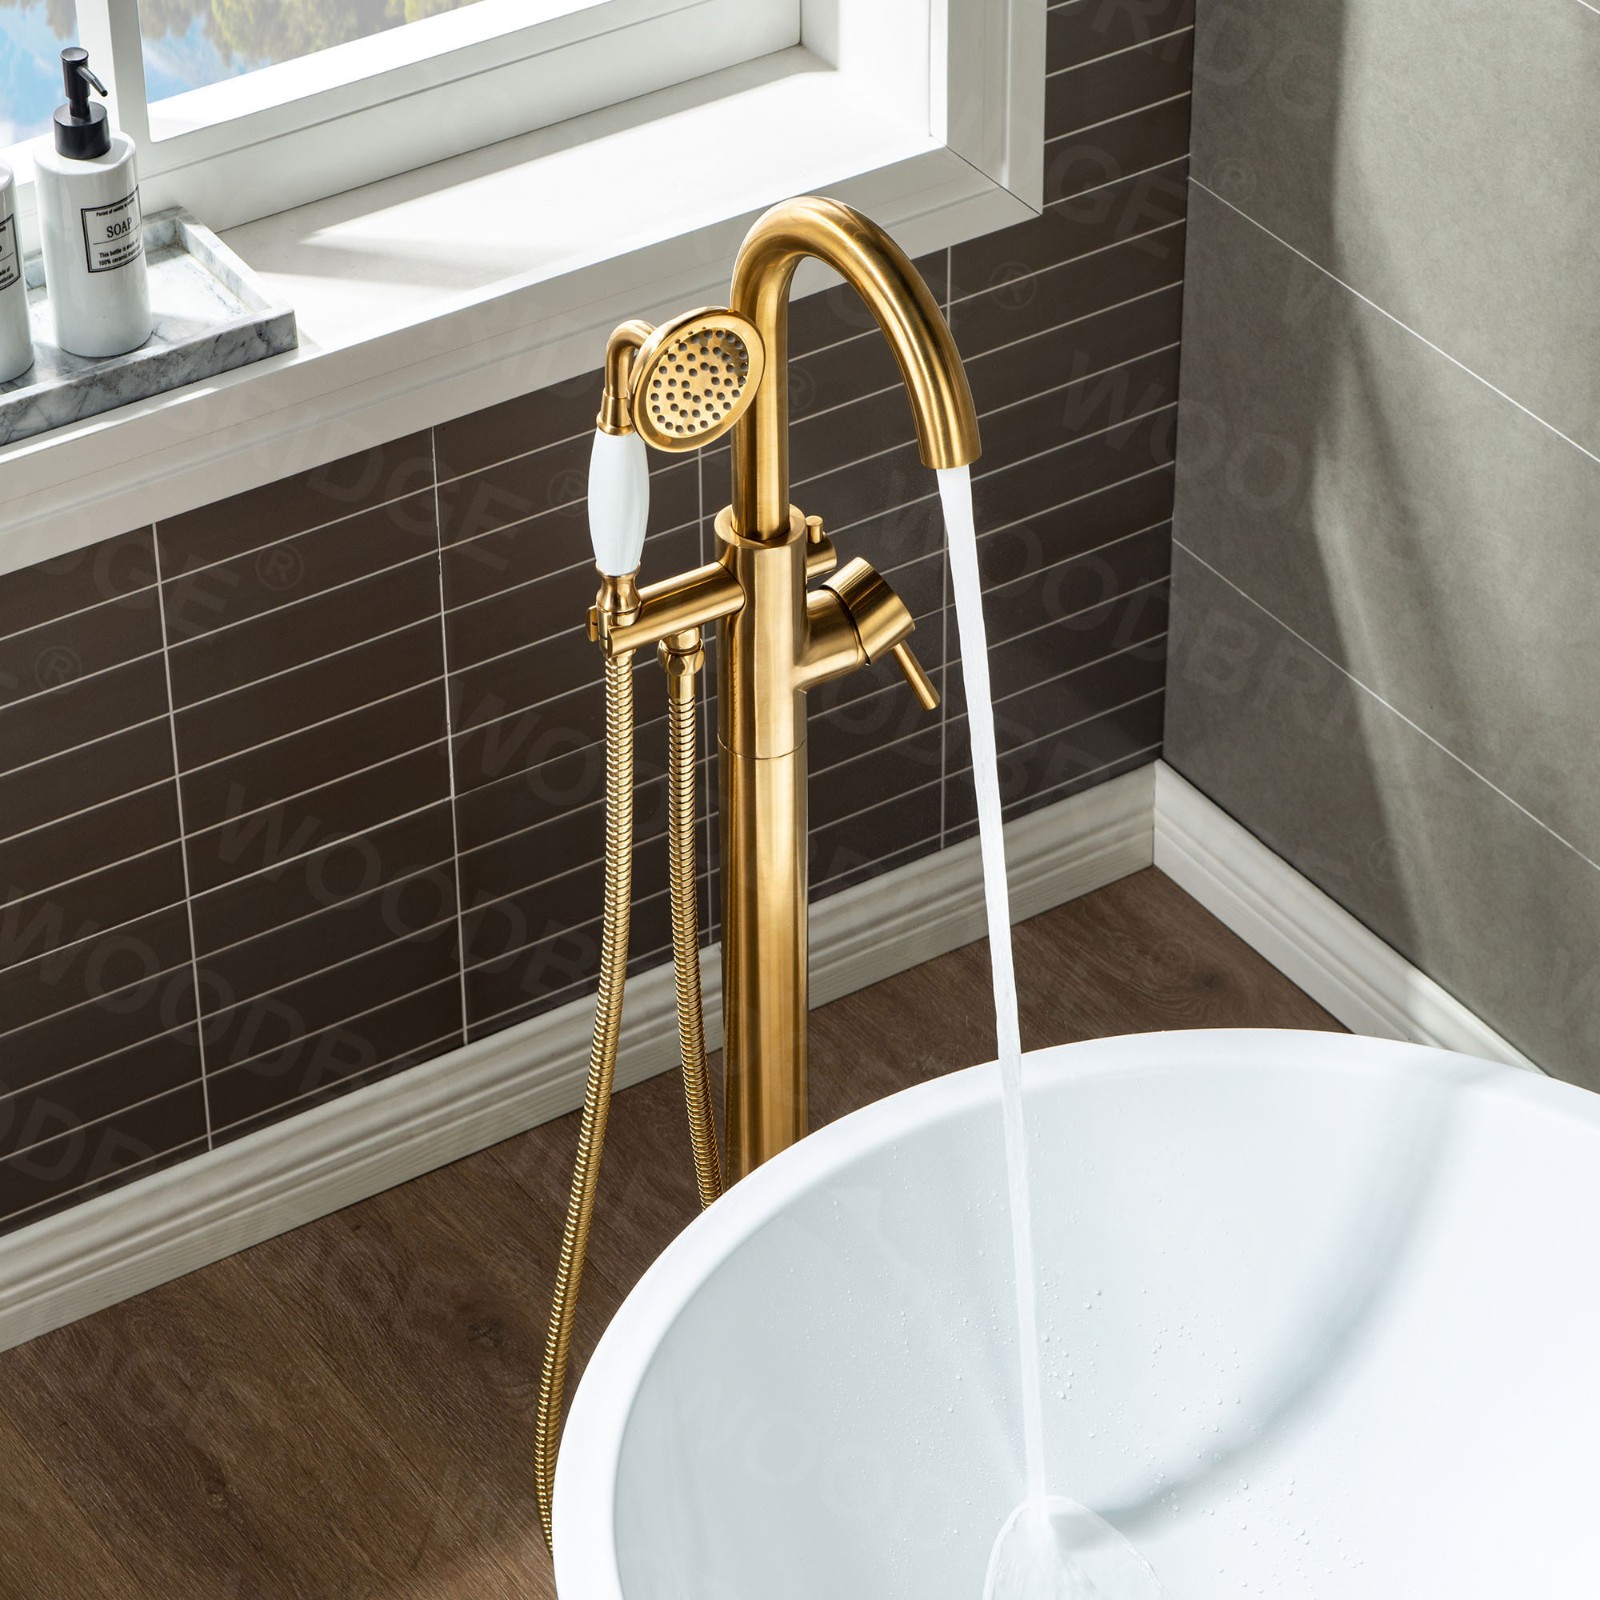  WOODBRIDGE F0007BGVT Fusion Single Handle Floor Mount Freestanding Tub Filler Faucet with Telephone Hand shower in Brushed Gold Finish._6131